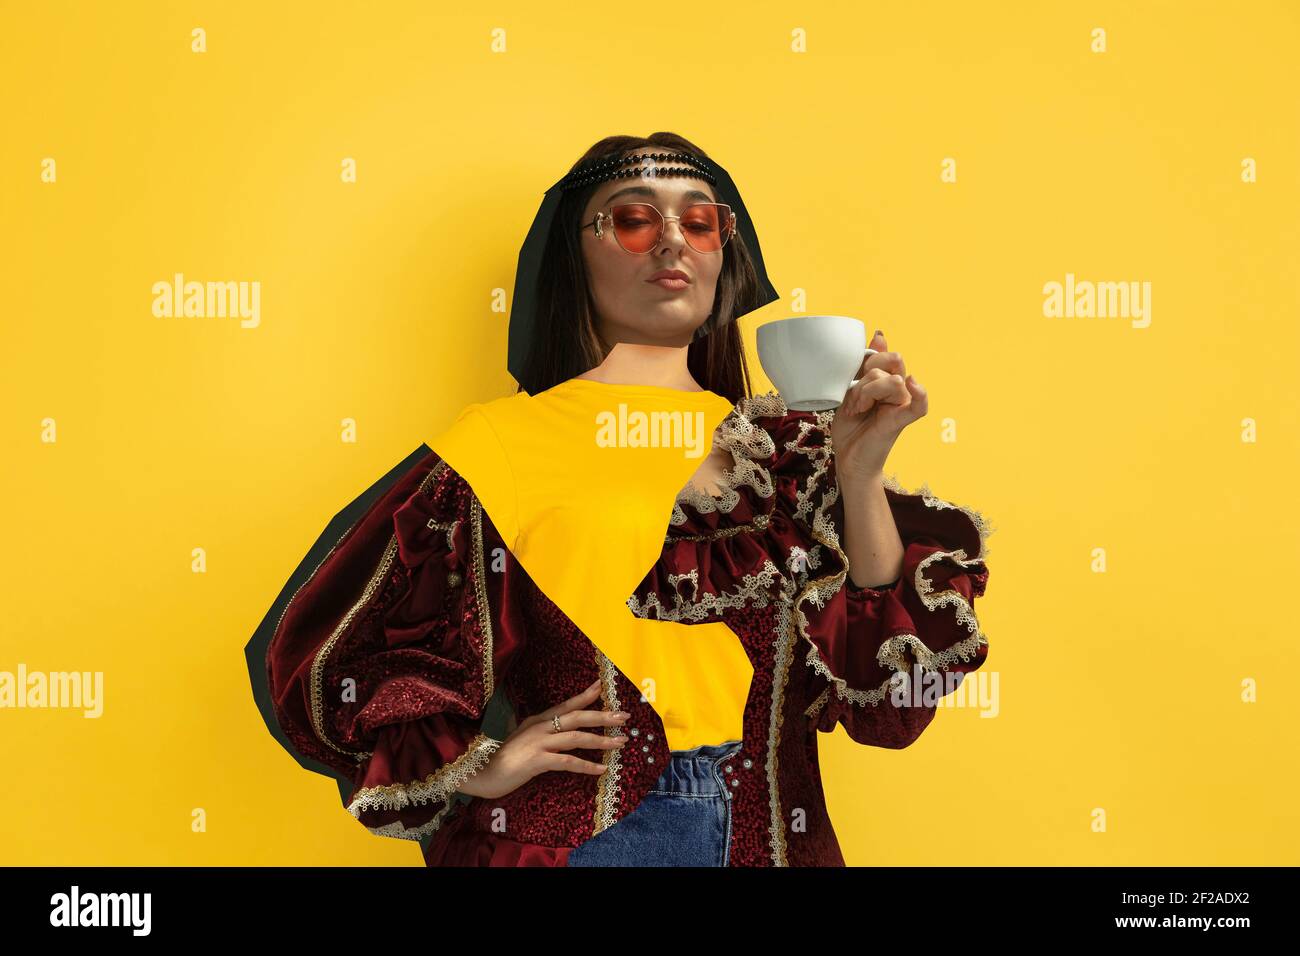 Woman drinking coffee. Magazine style collage with model outfit mixed of different eras. Copyspace for ad. Trendy colors, modern and vintage, renaissansse fashion. Cintemporary art collage. Stock Photo